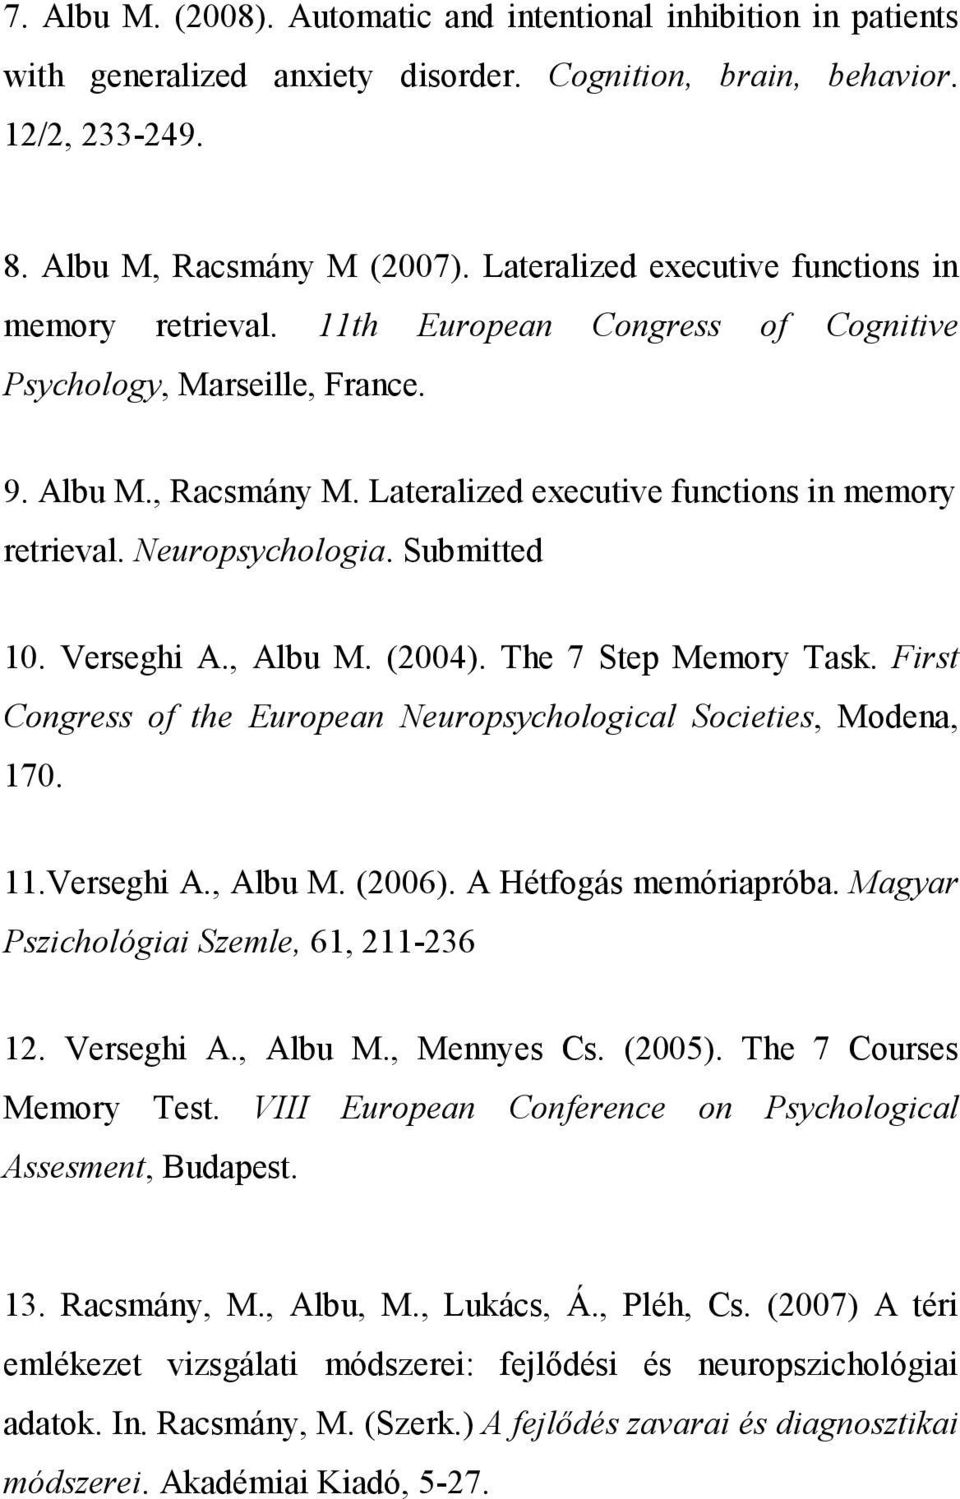 Neuropsychologia. Submitted 10. Verseghi A., Albu M. (2004). The 7 Step Memory Task. First Congress of the European Neuropsychological Societies, Modena, 170. 11.Verseghi A., Albu M. (2006).